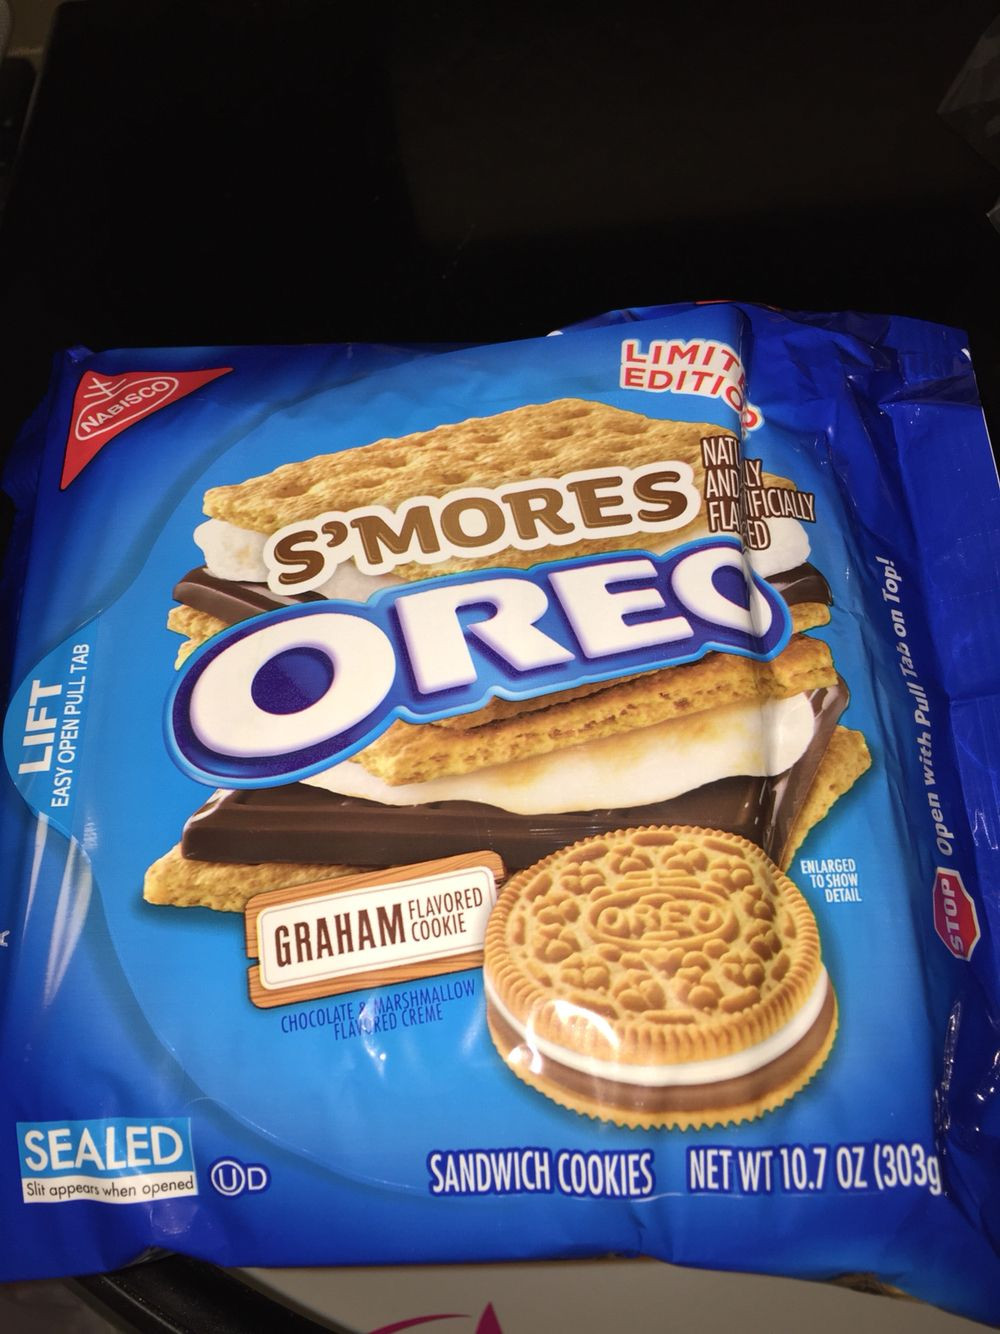 Nabisco Marshmallow Sandwich Cookies
 Nabisco S Mores Oreo graham flavored cookie